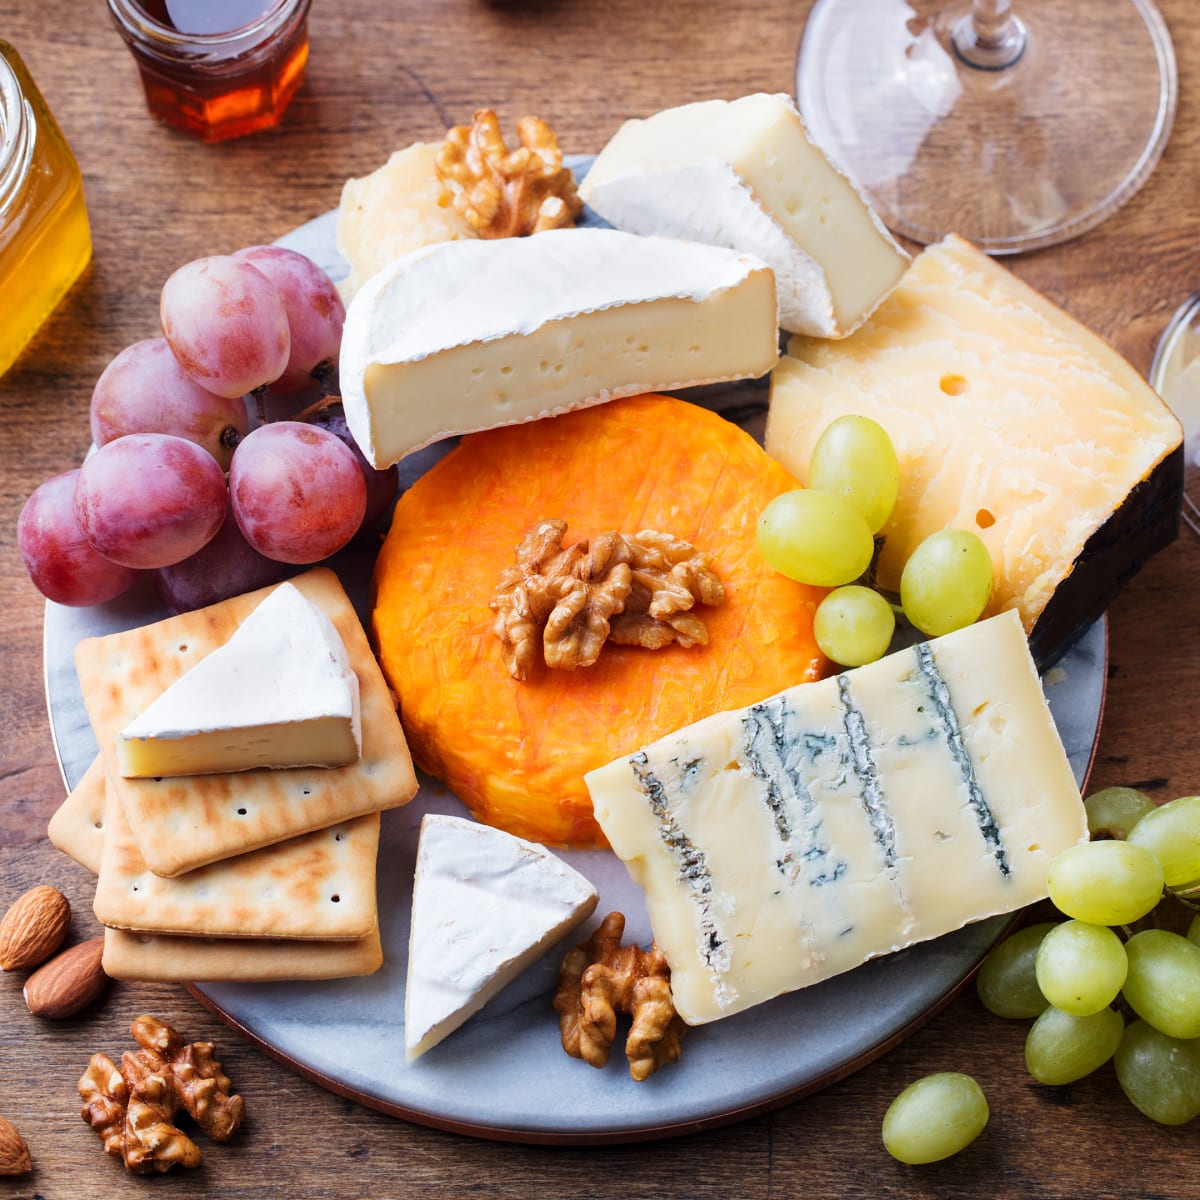 Table with cheese platter and grapes